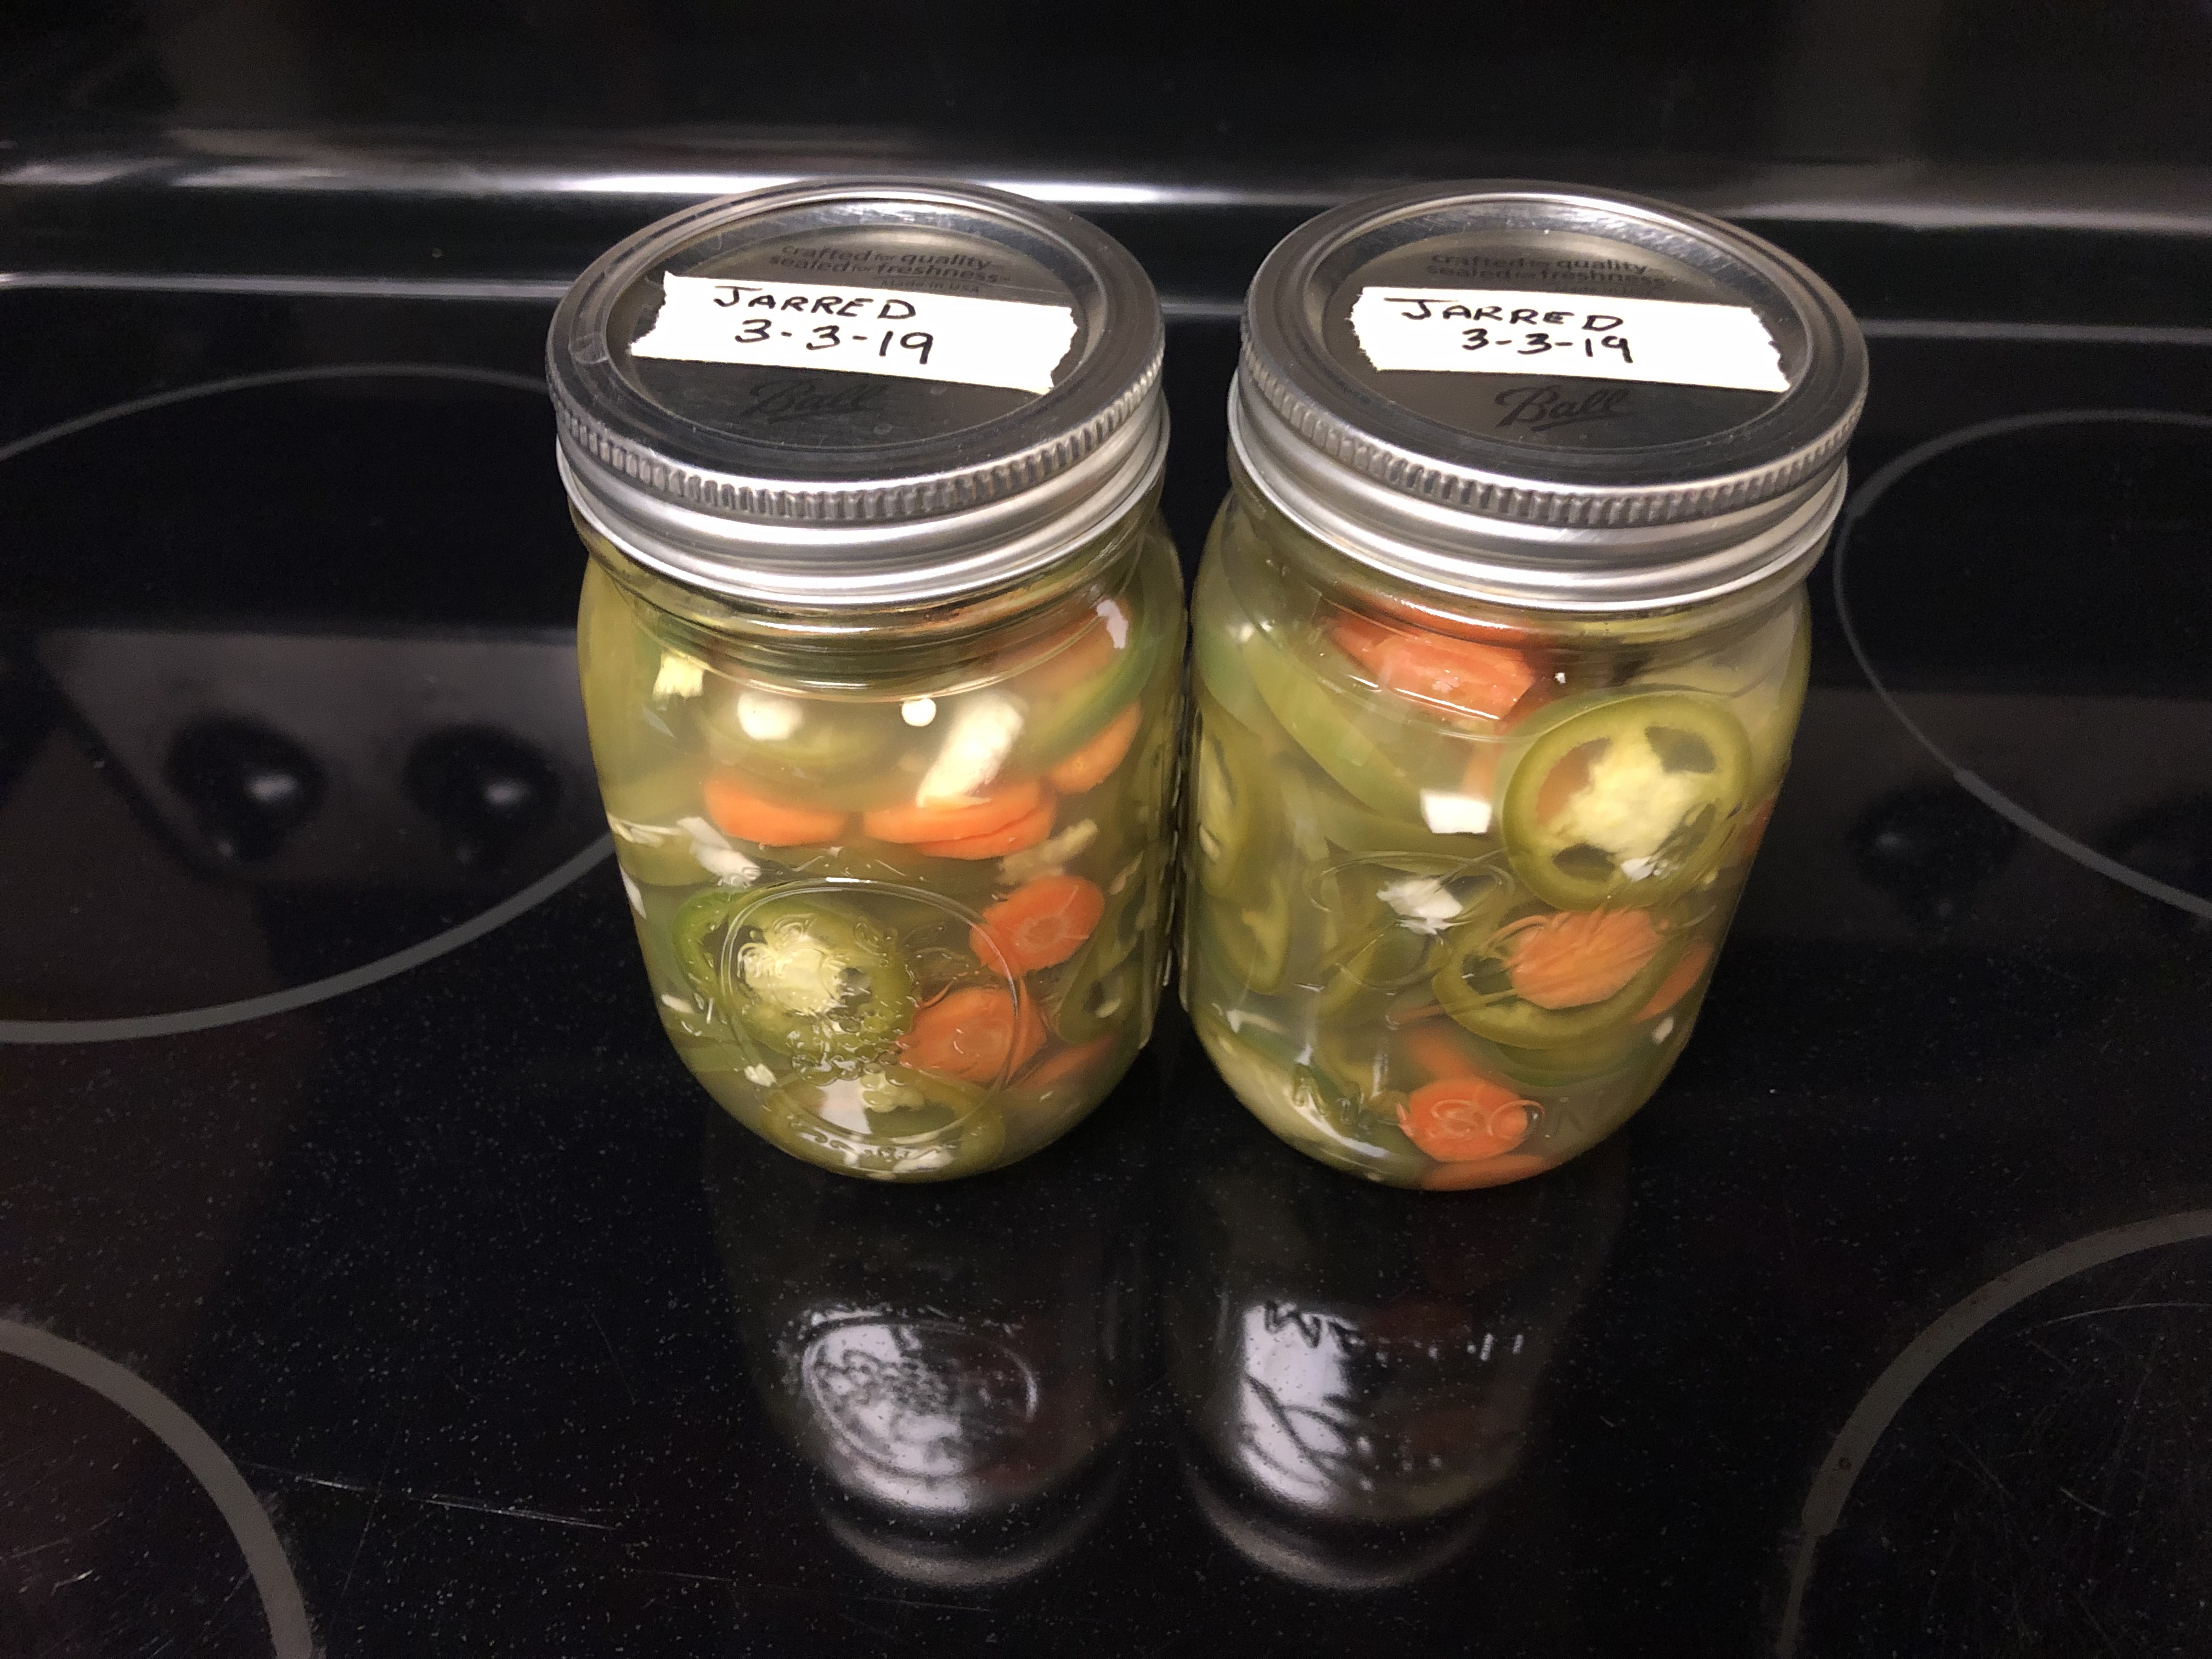 Ingredients and brine in mason jars with labeled tape on lid showing jarred date